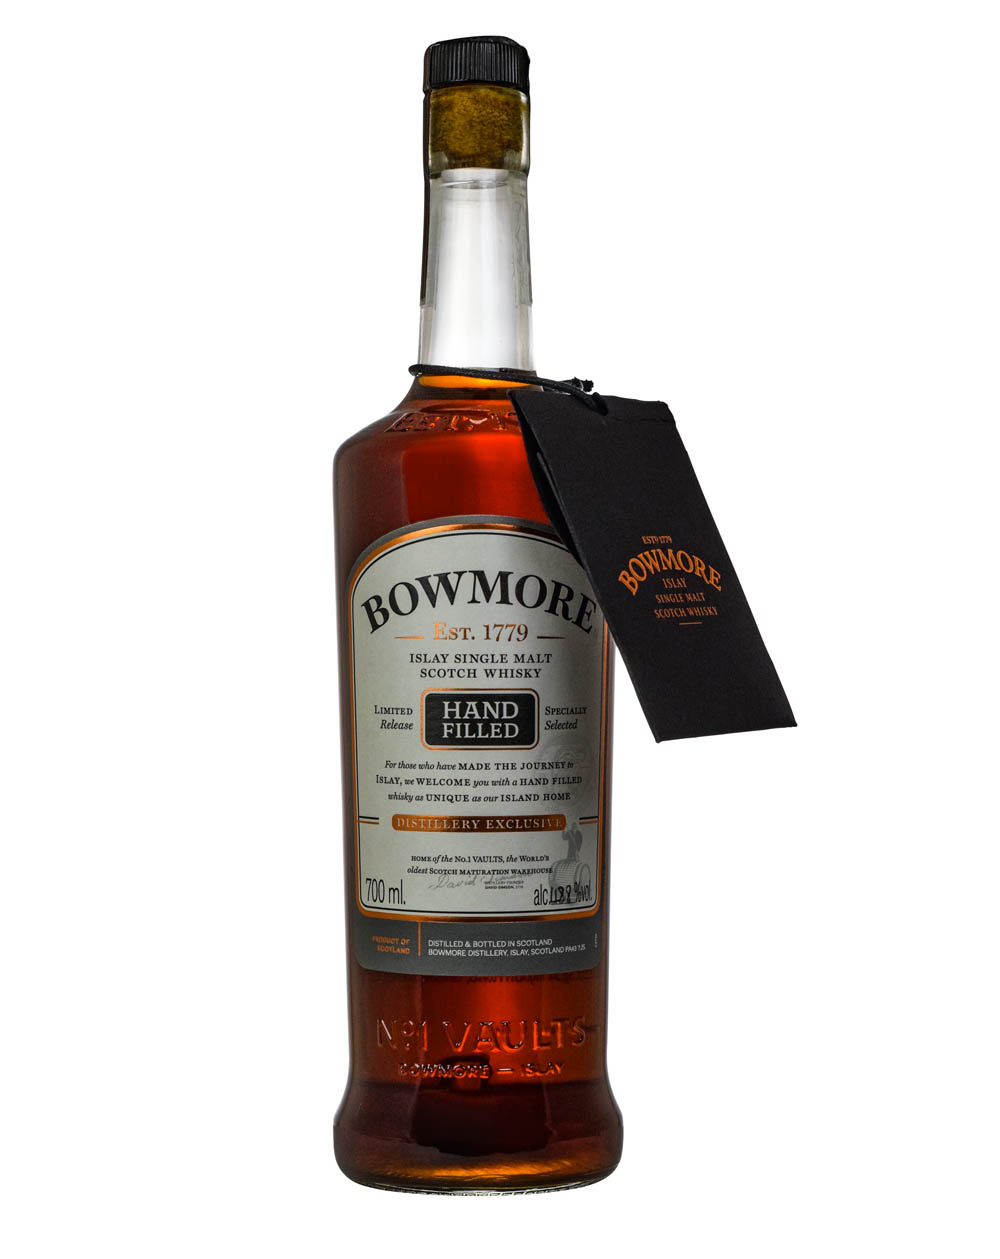 Bowmore 24 Years Old Hand filled Distillery Exclusive 1995-2019 Must Have Malts MHM